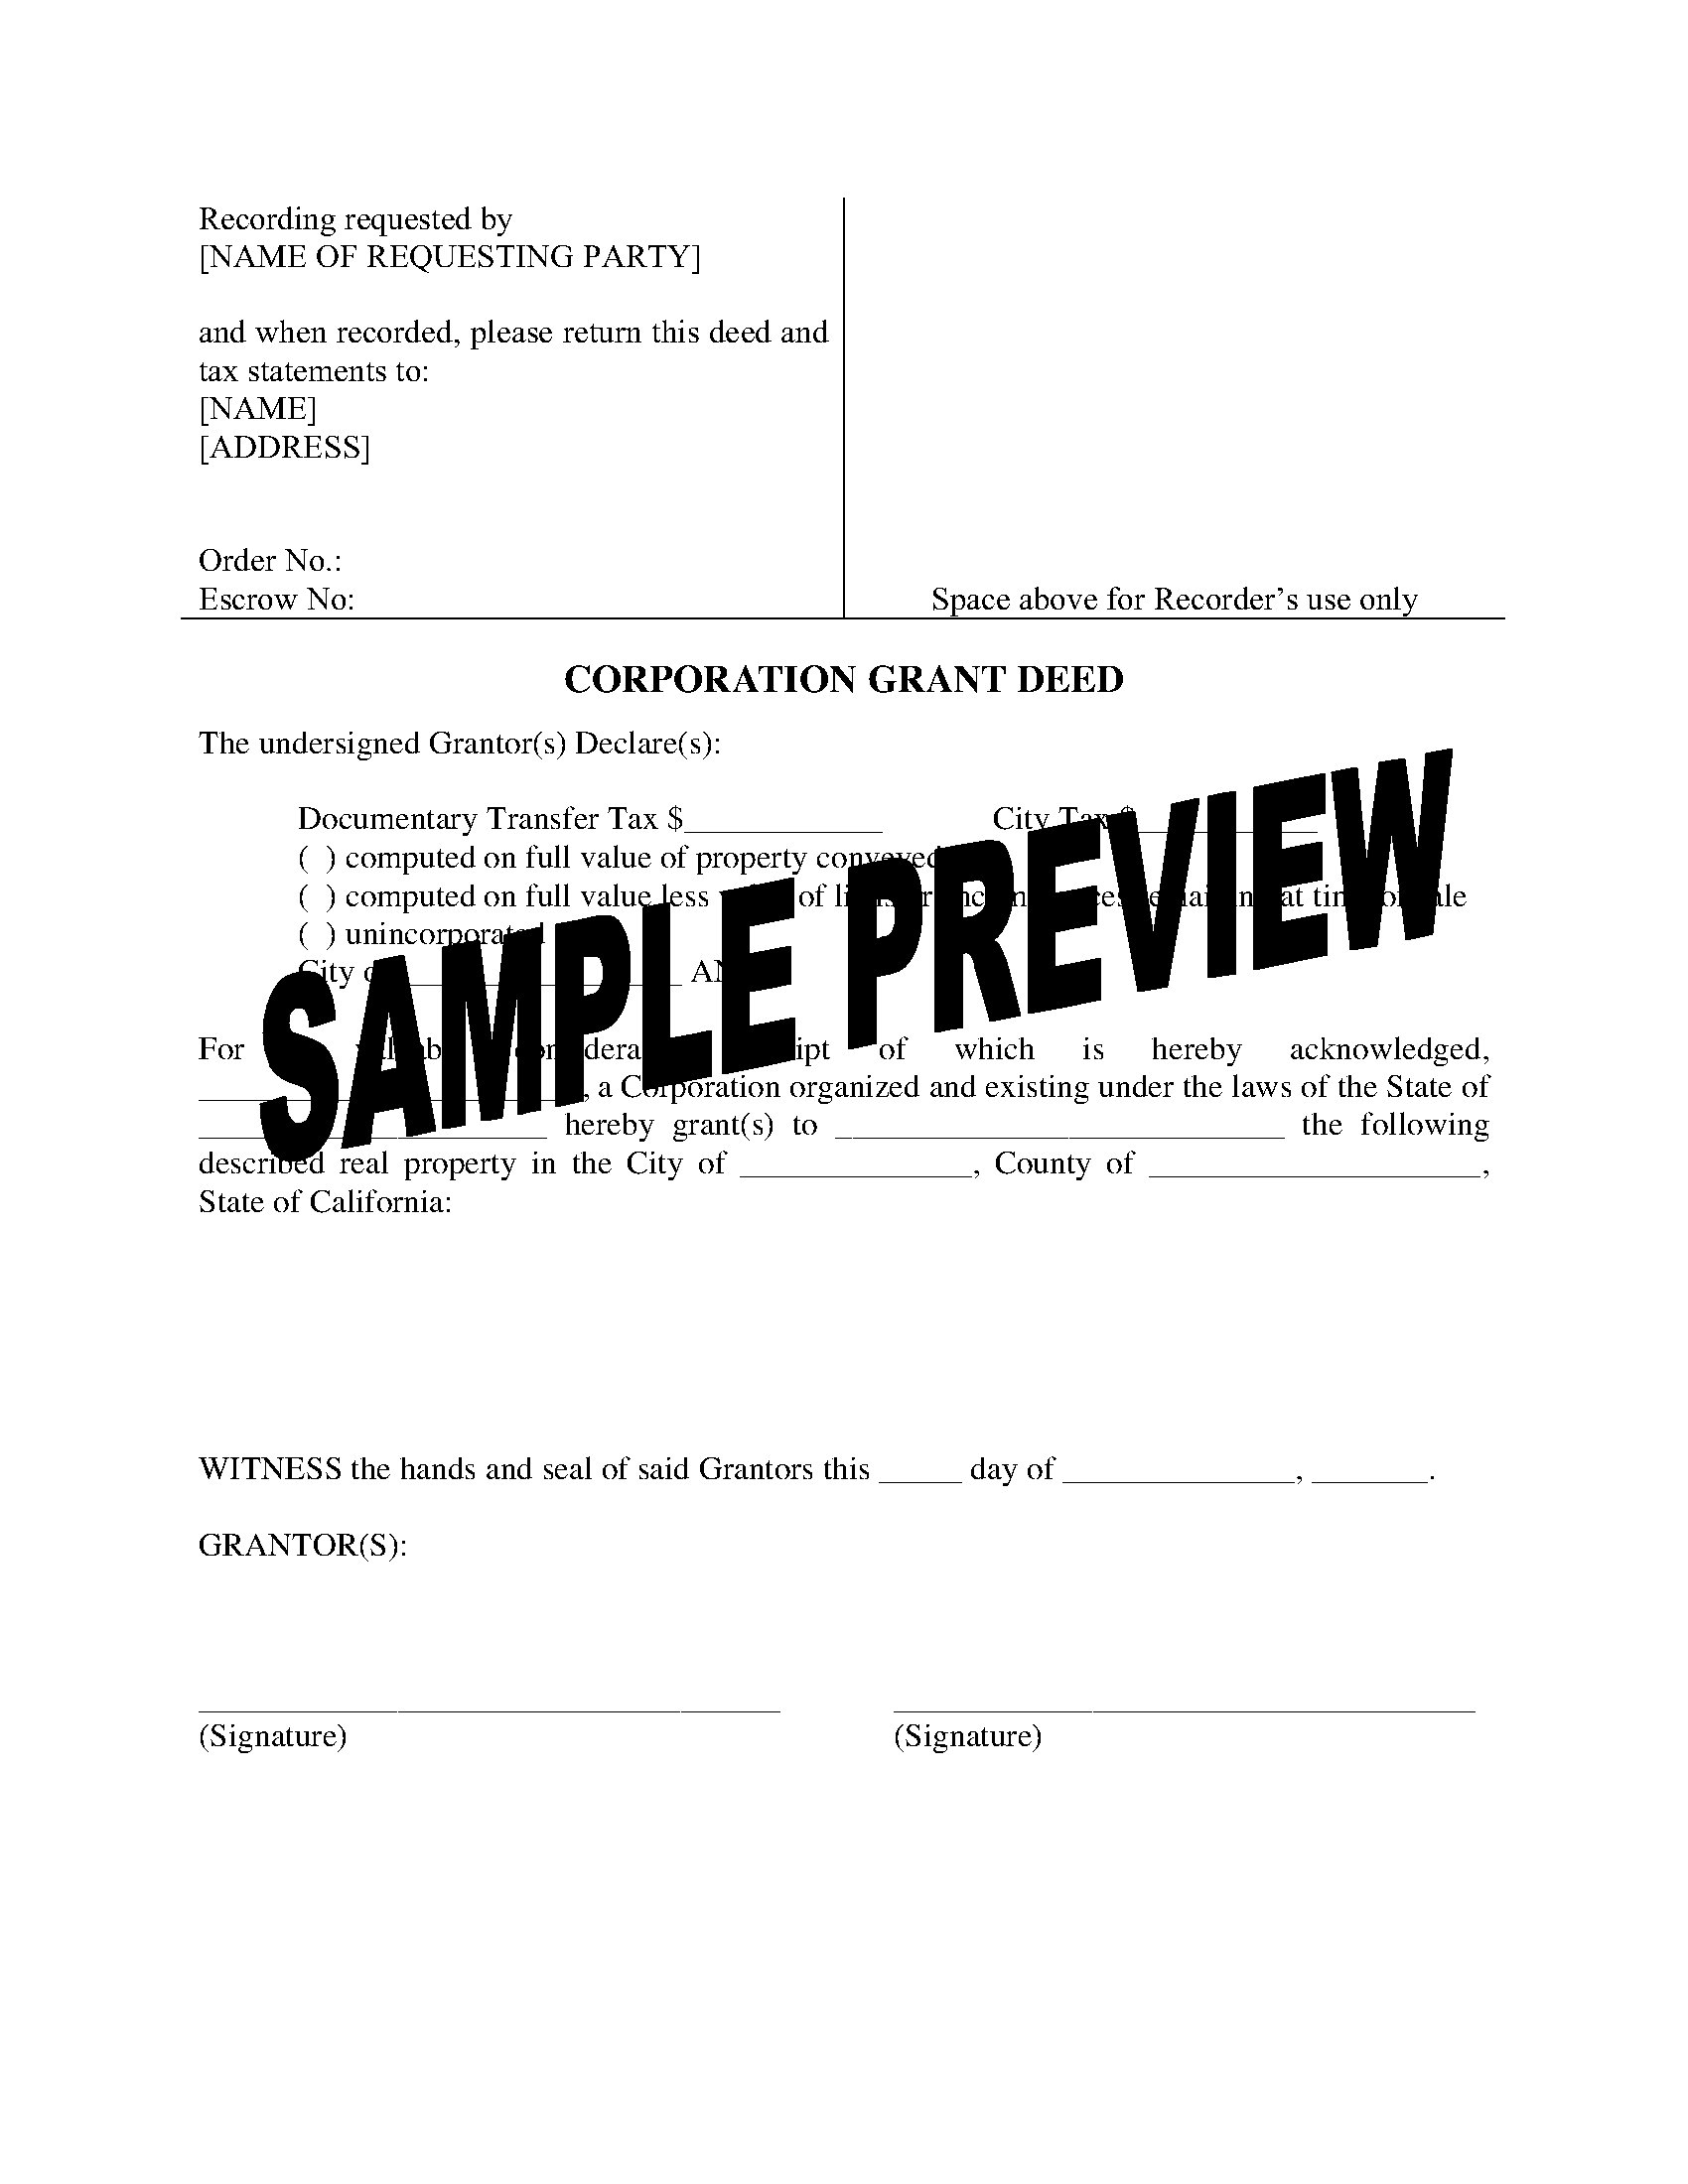 california-corporation-grant-deed-legal-forms-and-business-templates